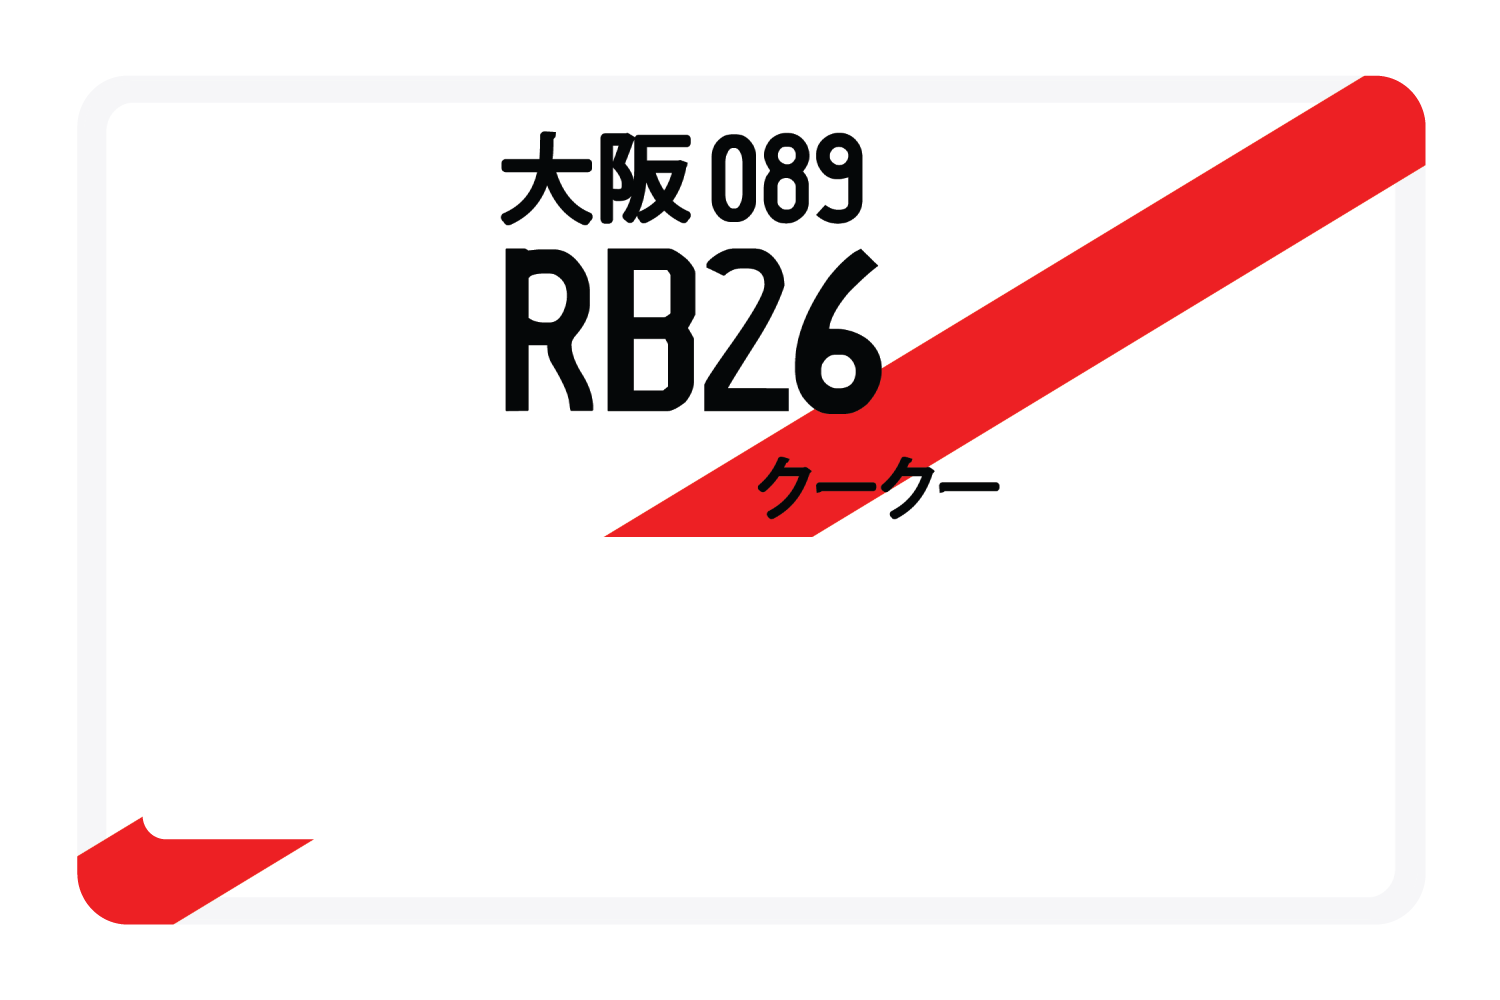 RB26